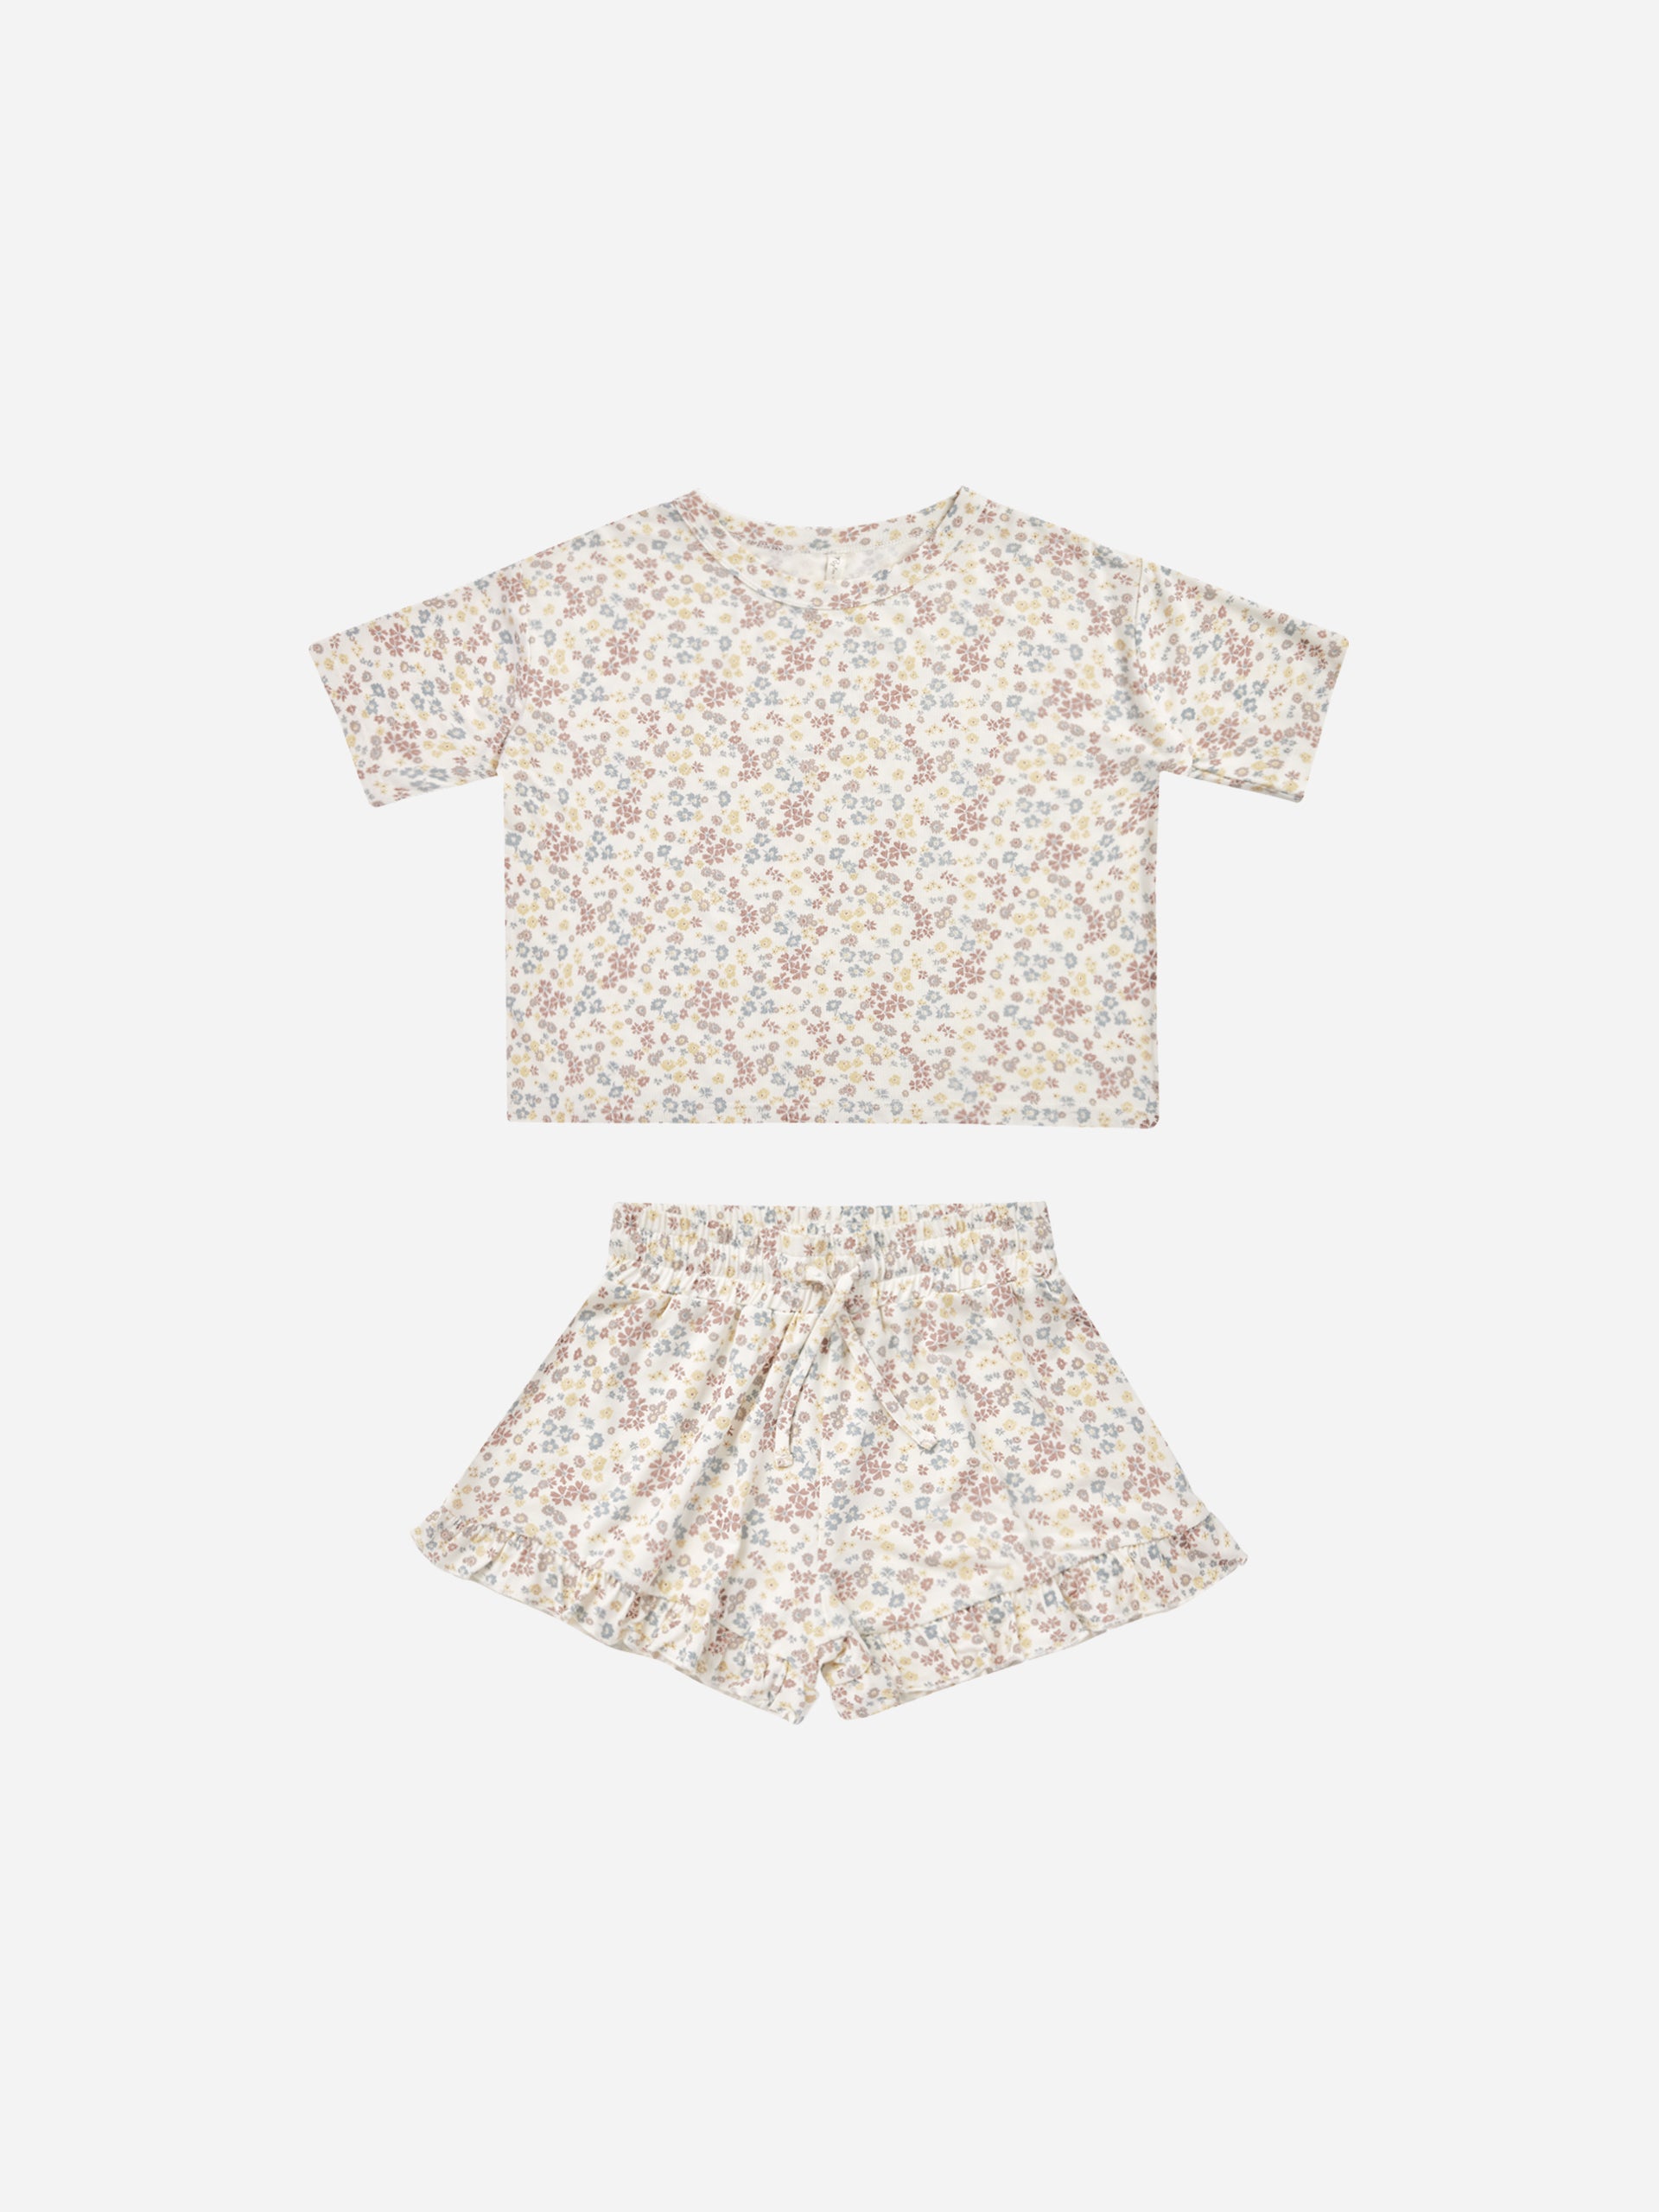 Mosie Set || Wild Flower - Rylee + Cru | Kids Clothes | Trendy Baby Clothes | Modern Infant Outfits |